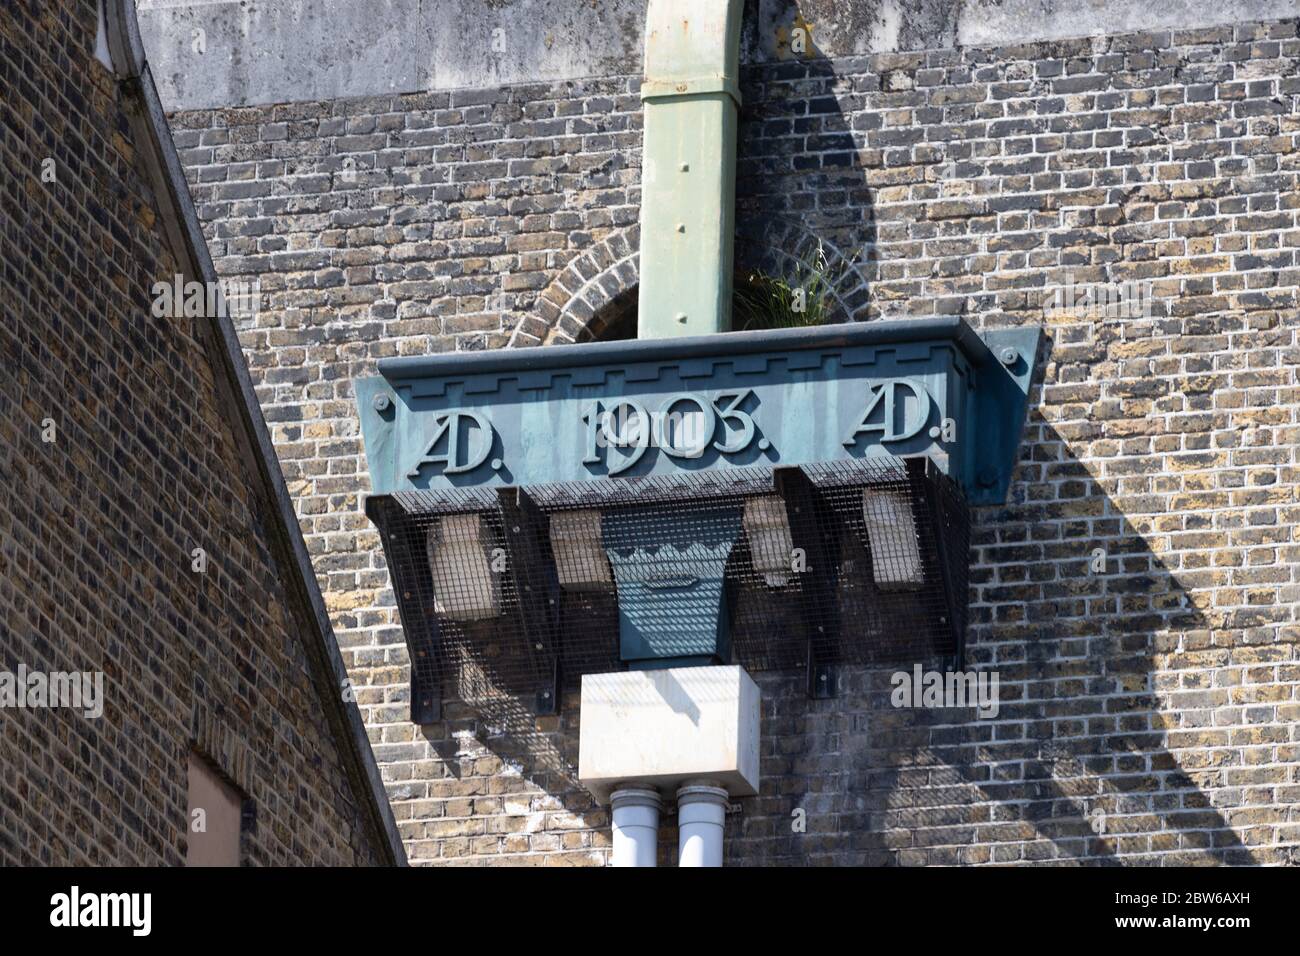 Guttering downpipes Hopper Head dated AD 1903, Stock Photo